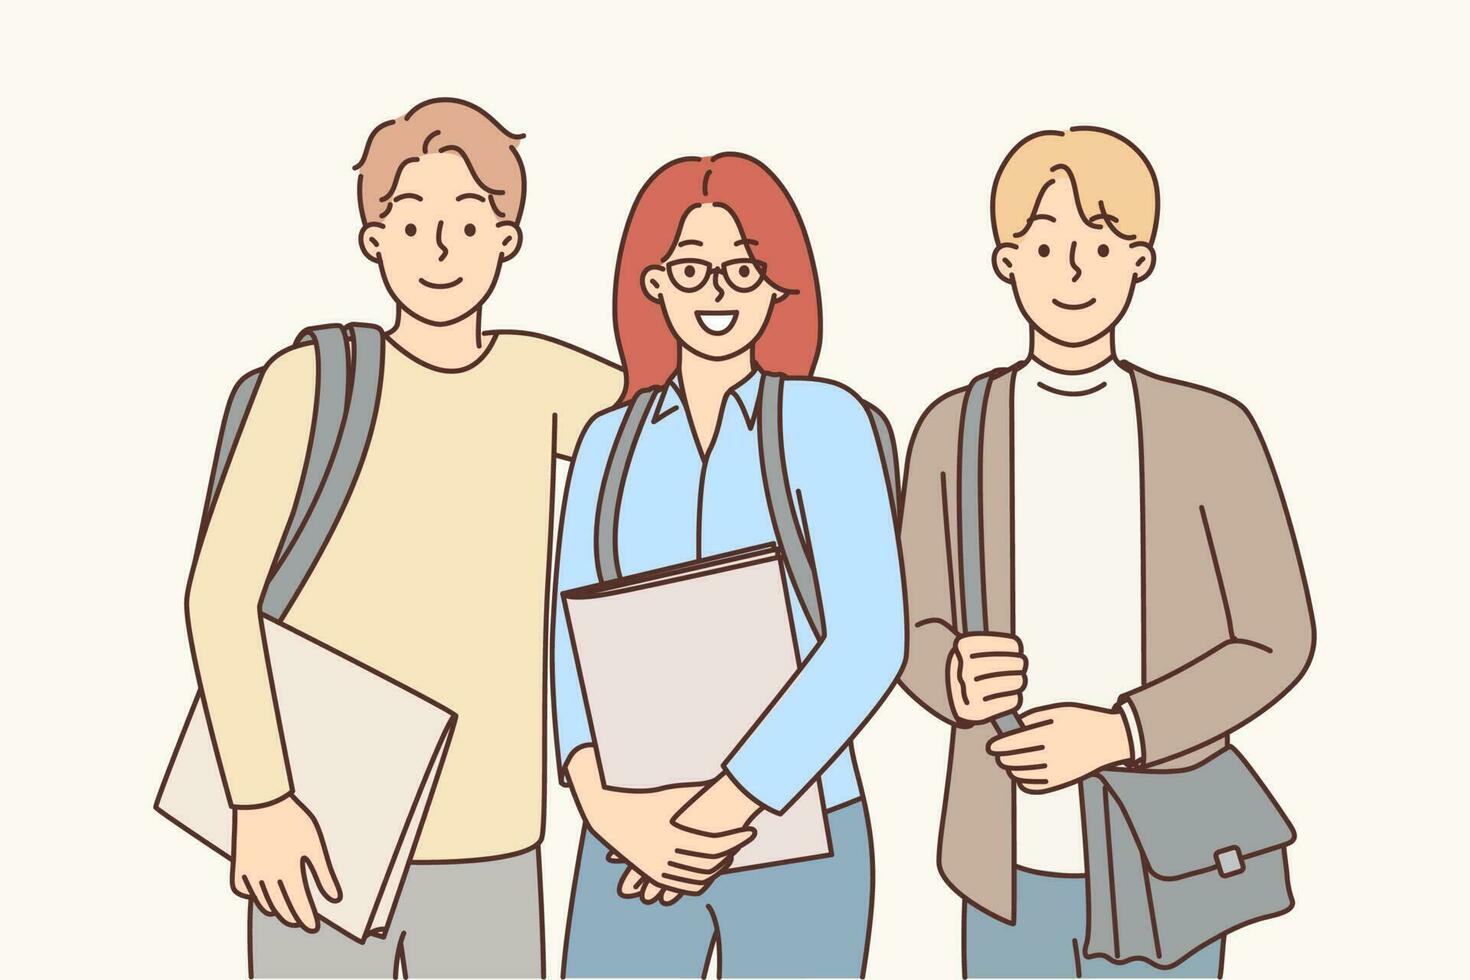 College friends with backpacks and workbooks smiling looking at camera for group photo with friends. Two men and woman enjoy spending time together after class on college or university campus vector